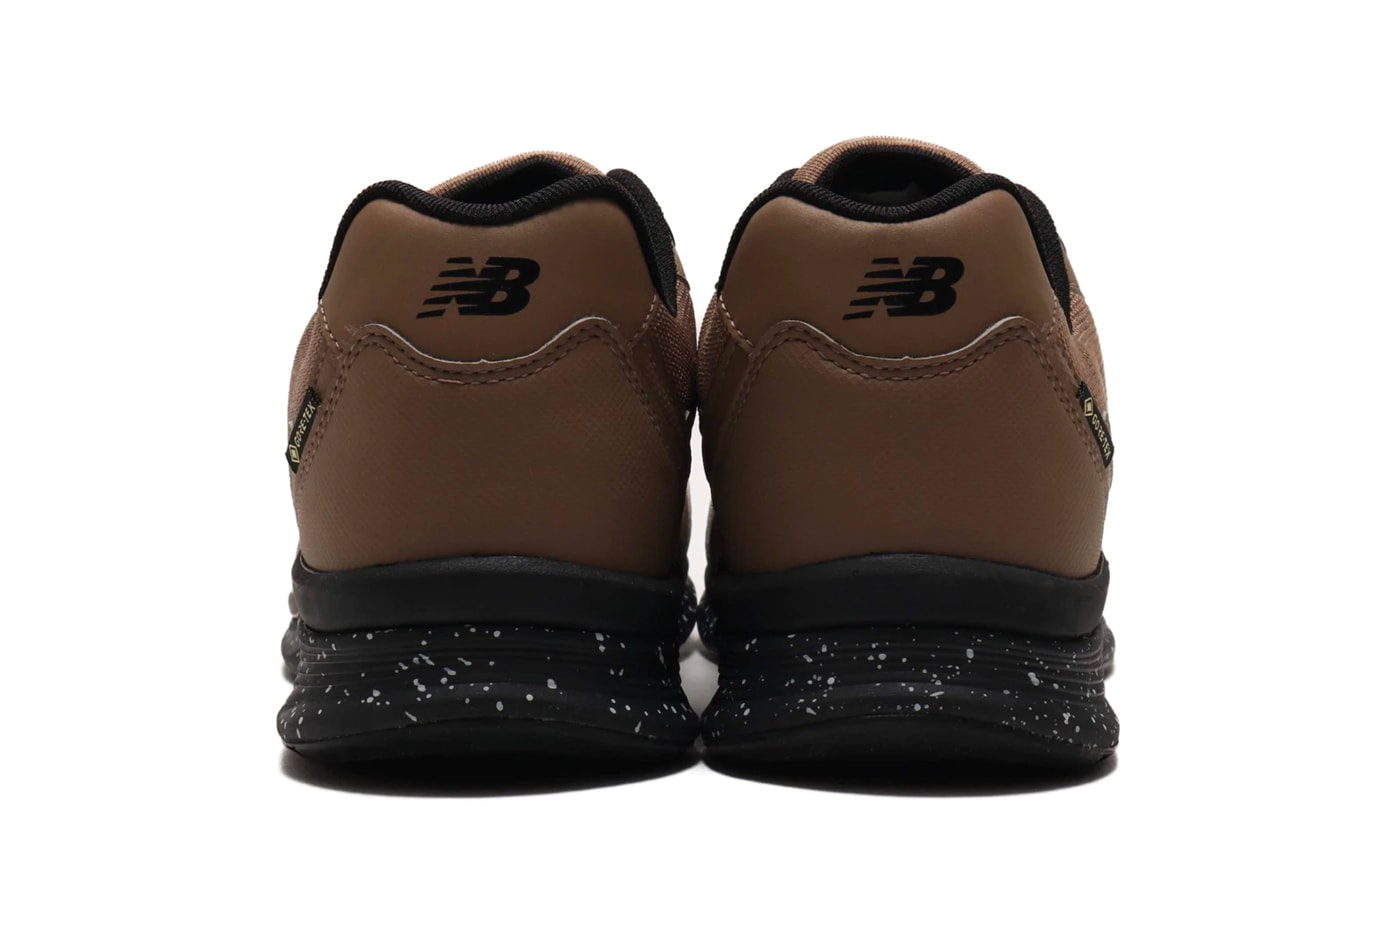 New Balance MW880GT4 GORE TEX Brown footwear shoes sneakers kicks runners trainers spring summer 2020 collection trufuse cushioning technology weatherized waterproof